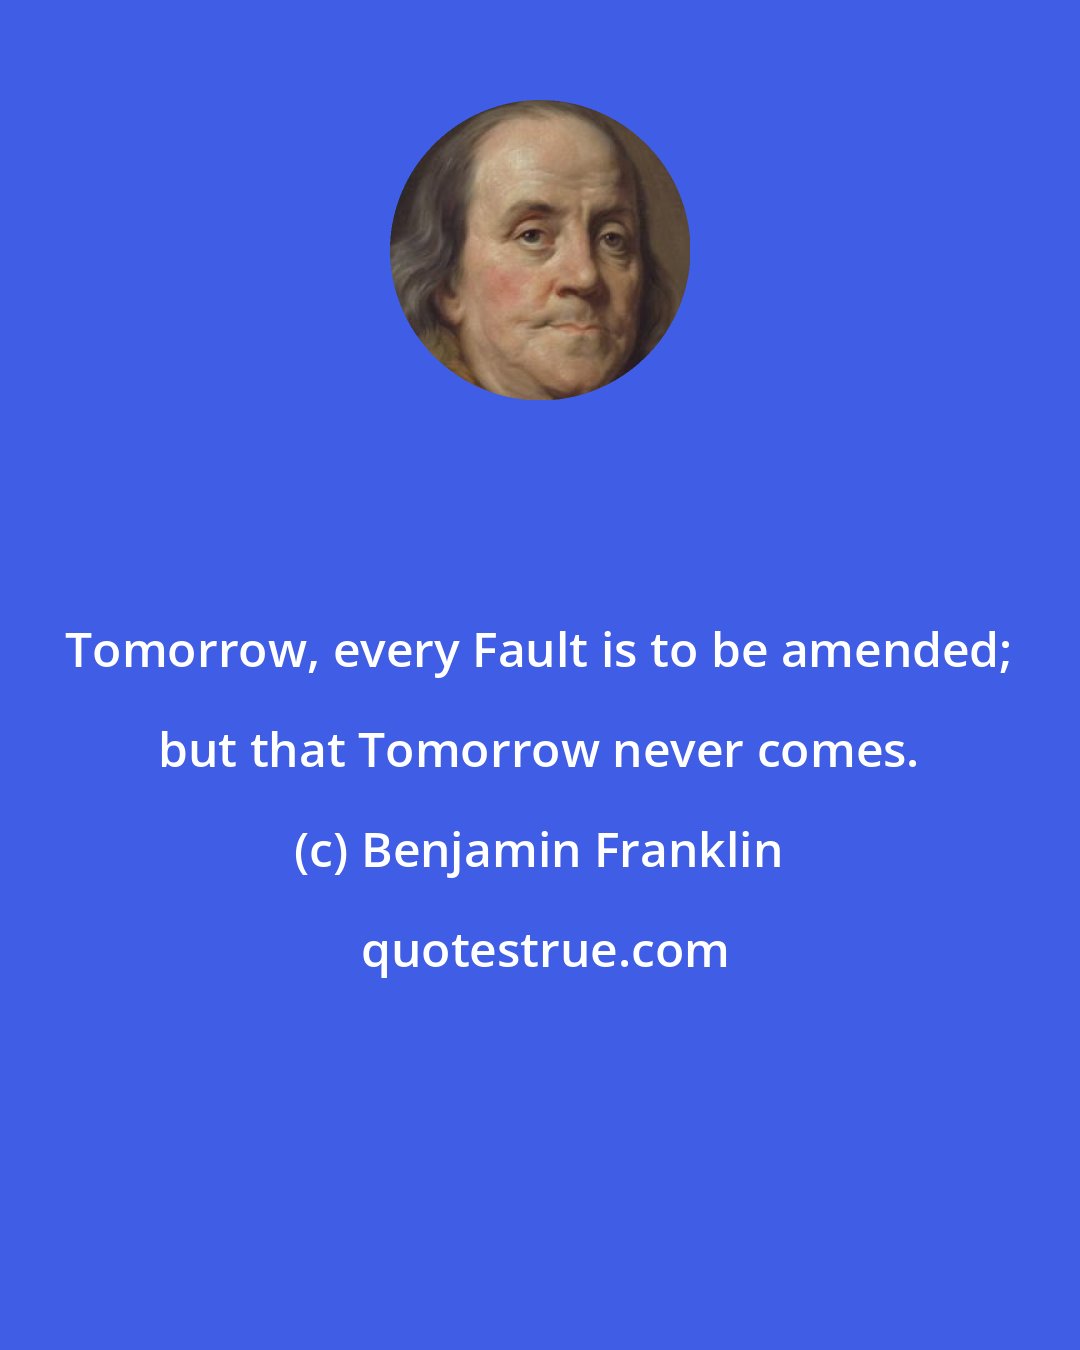 Benjamin Franklin: Tomorrow, every Fault is to be amended; but that Tomorrow never comes.